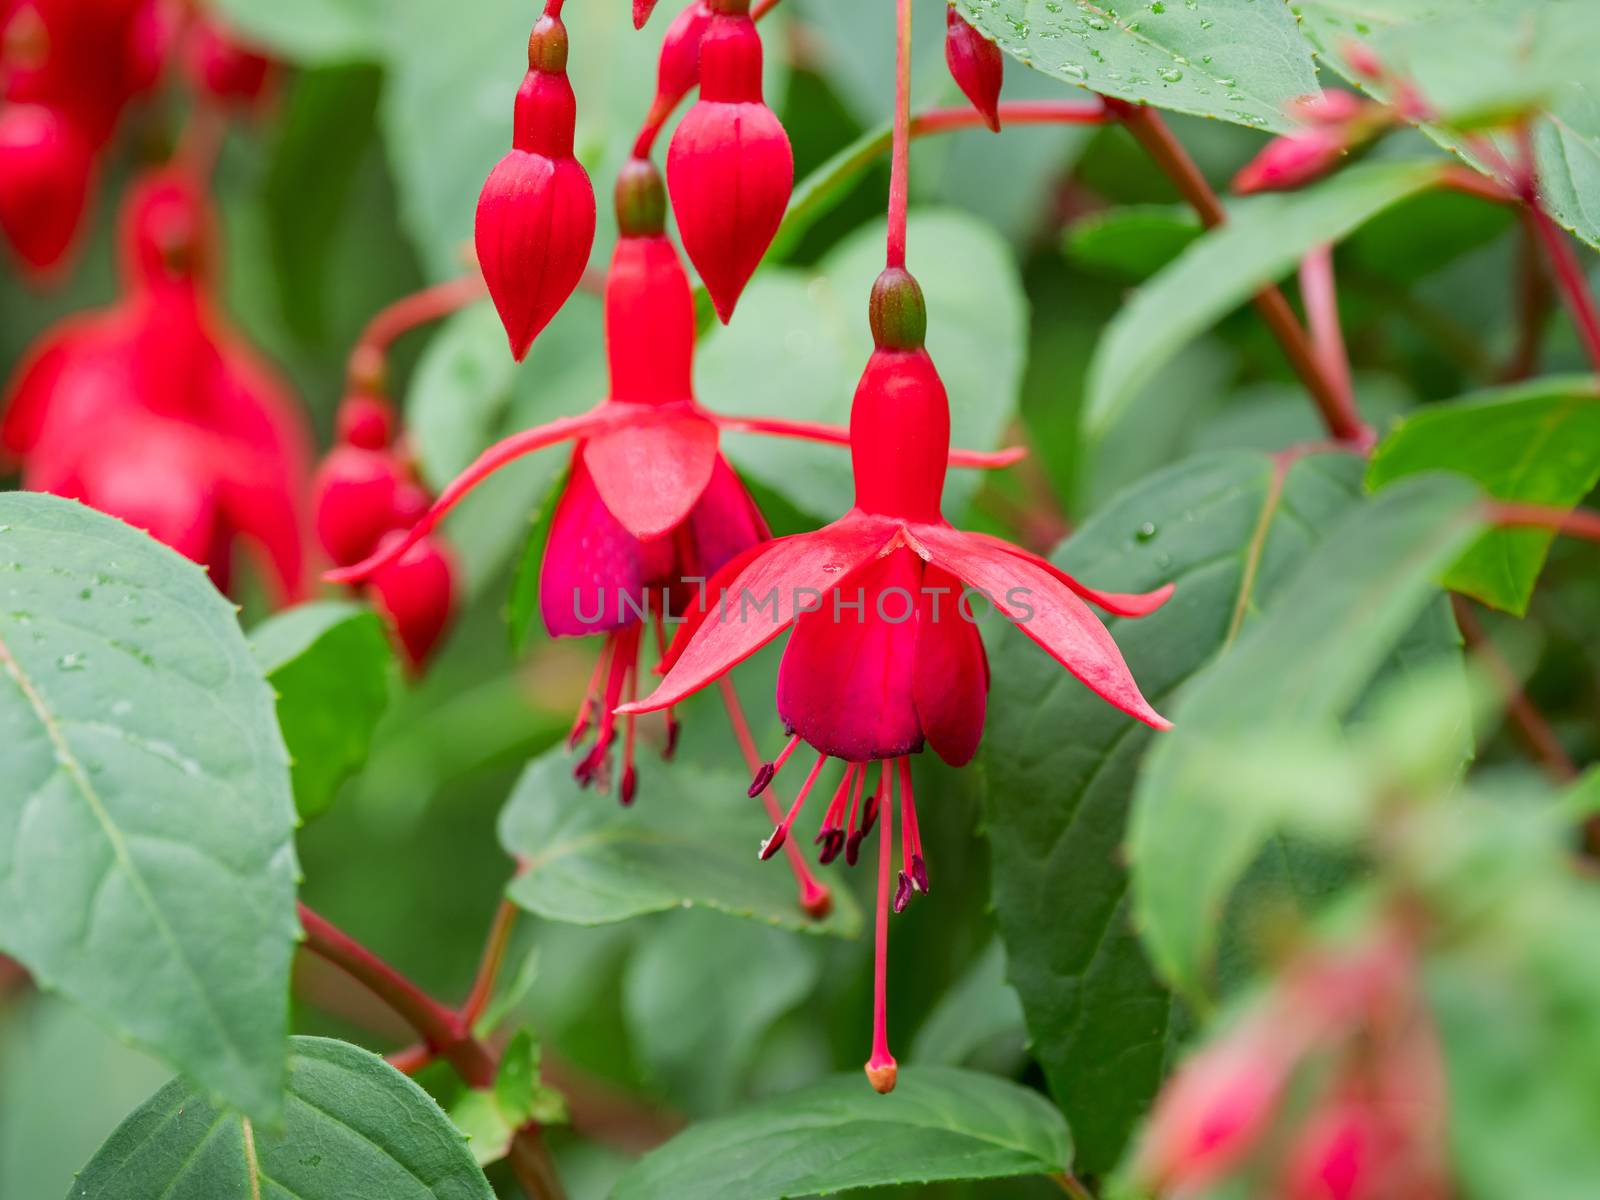 Blooming Fuchsia after rain. Close up photo of red flowers with raindrops on leaves and petals. by aksenovko